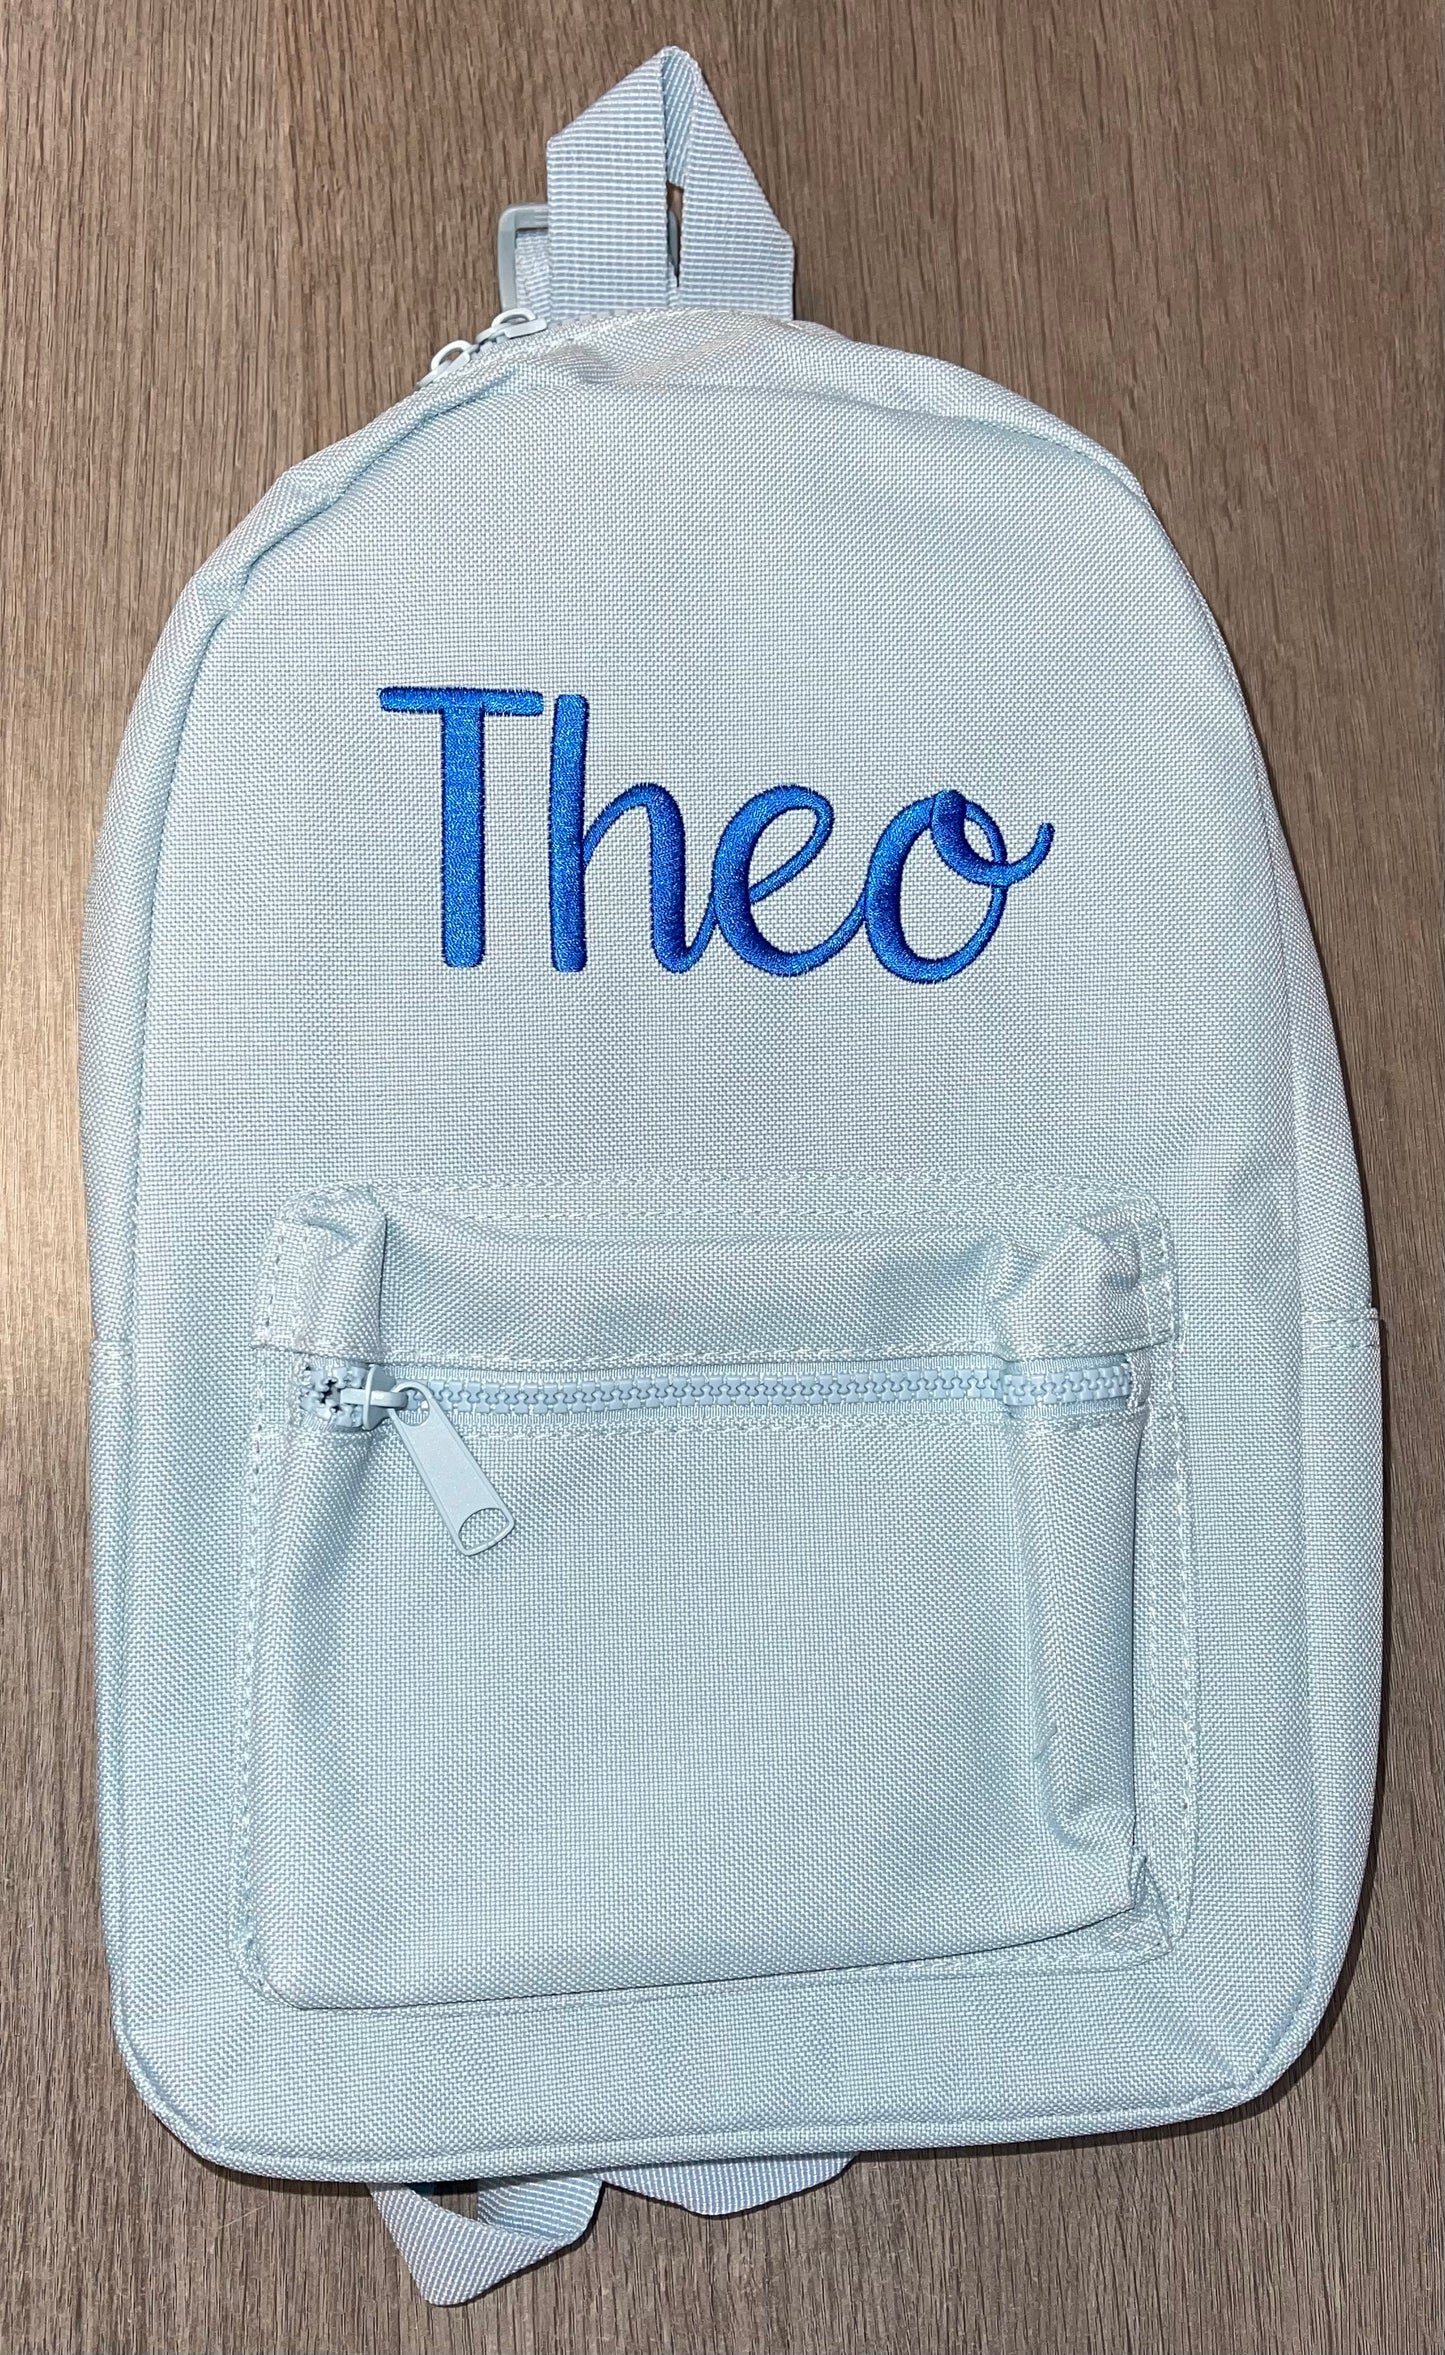 Personalised childrens backpack - Name only design